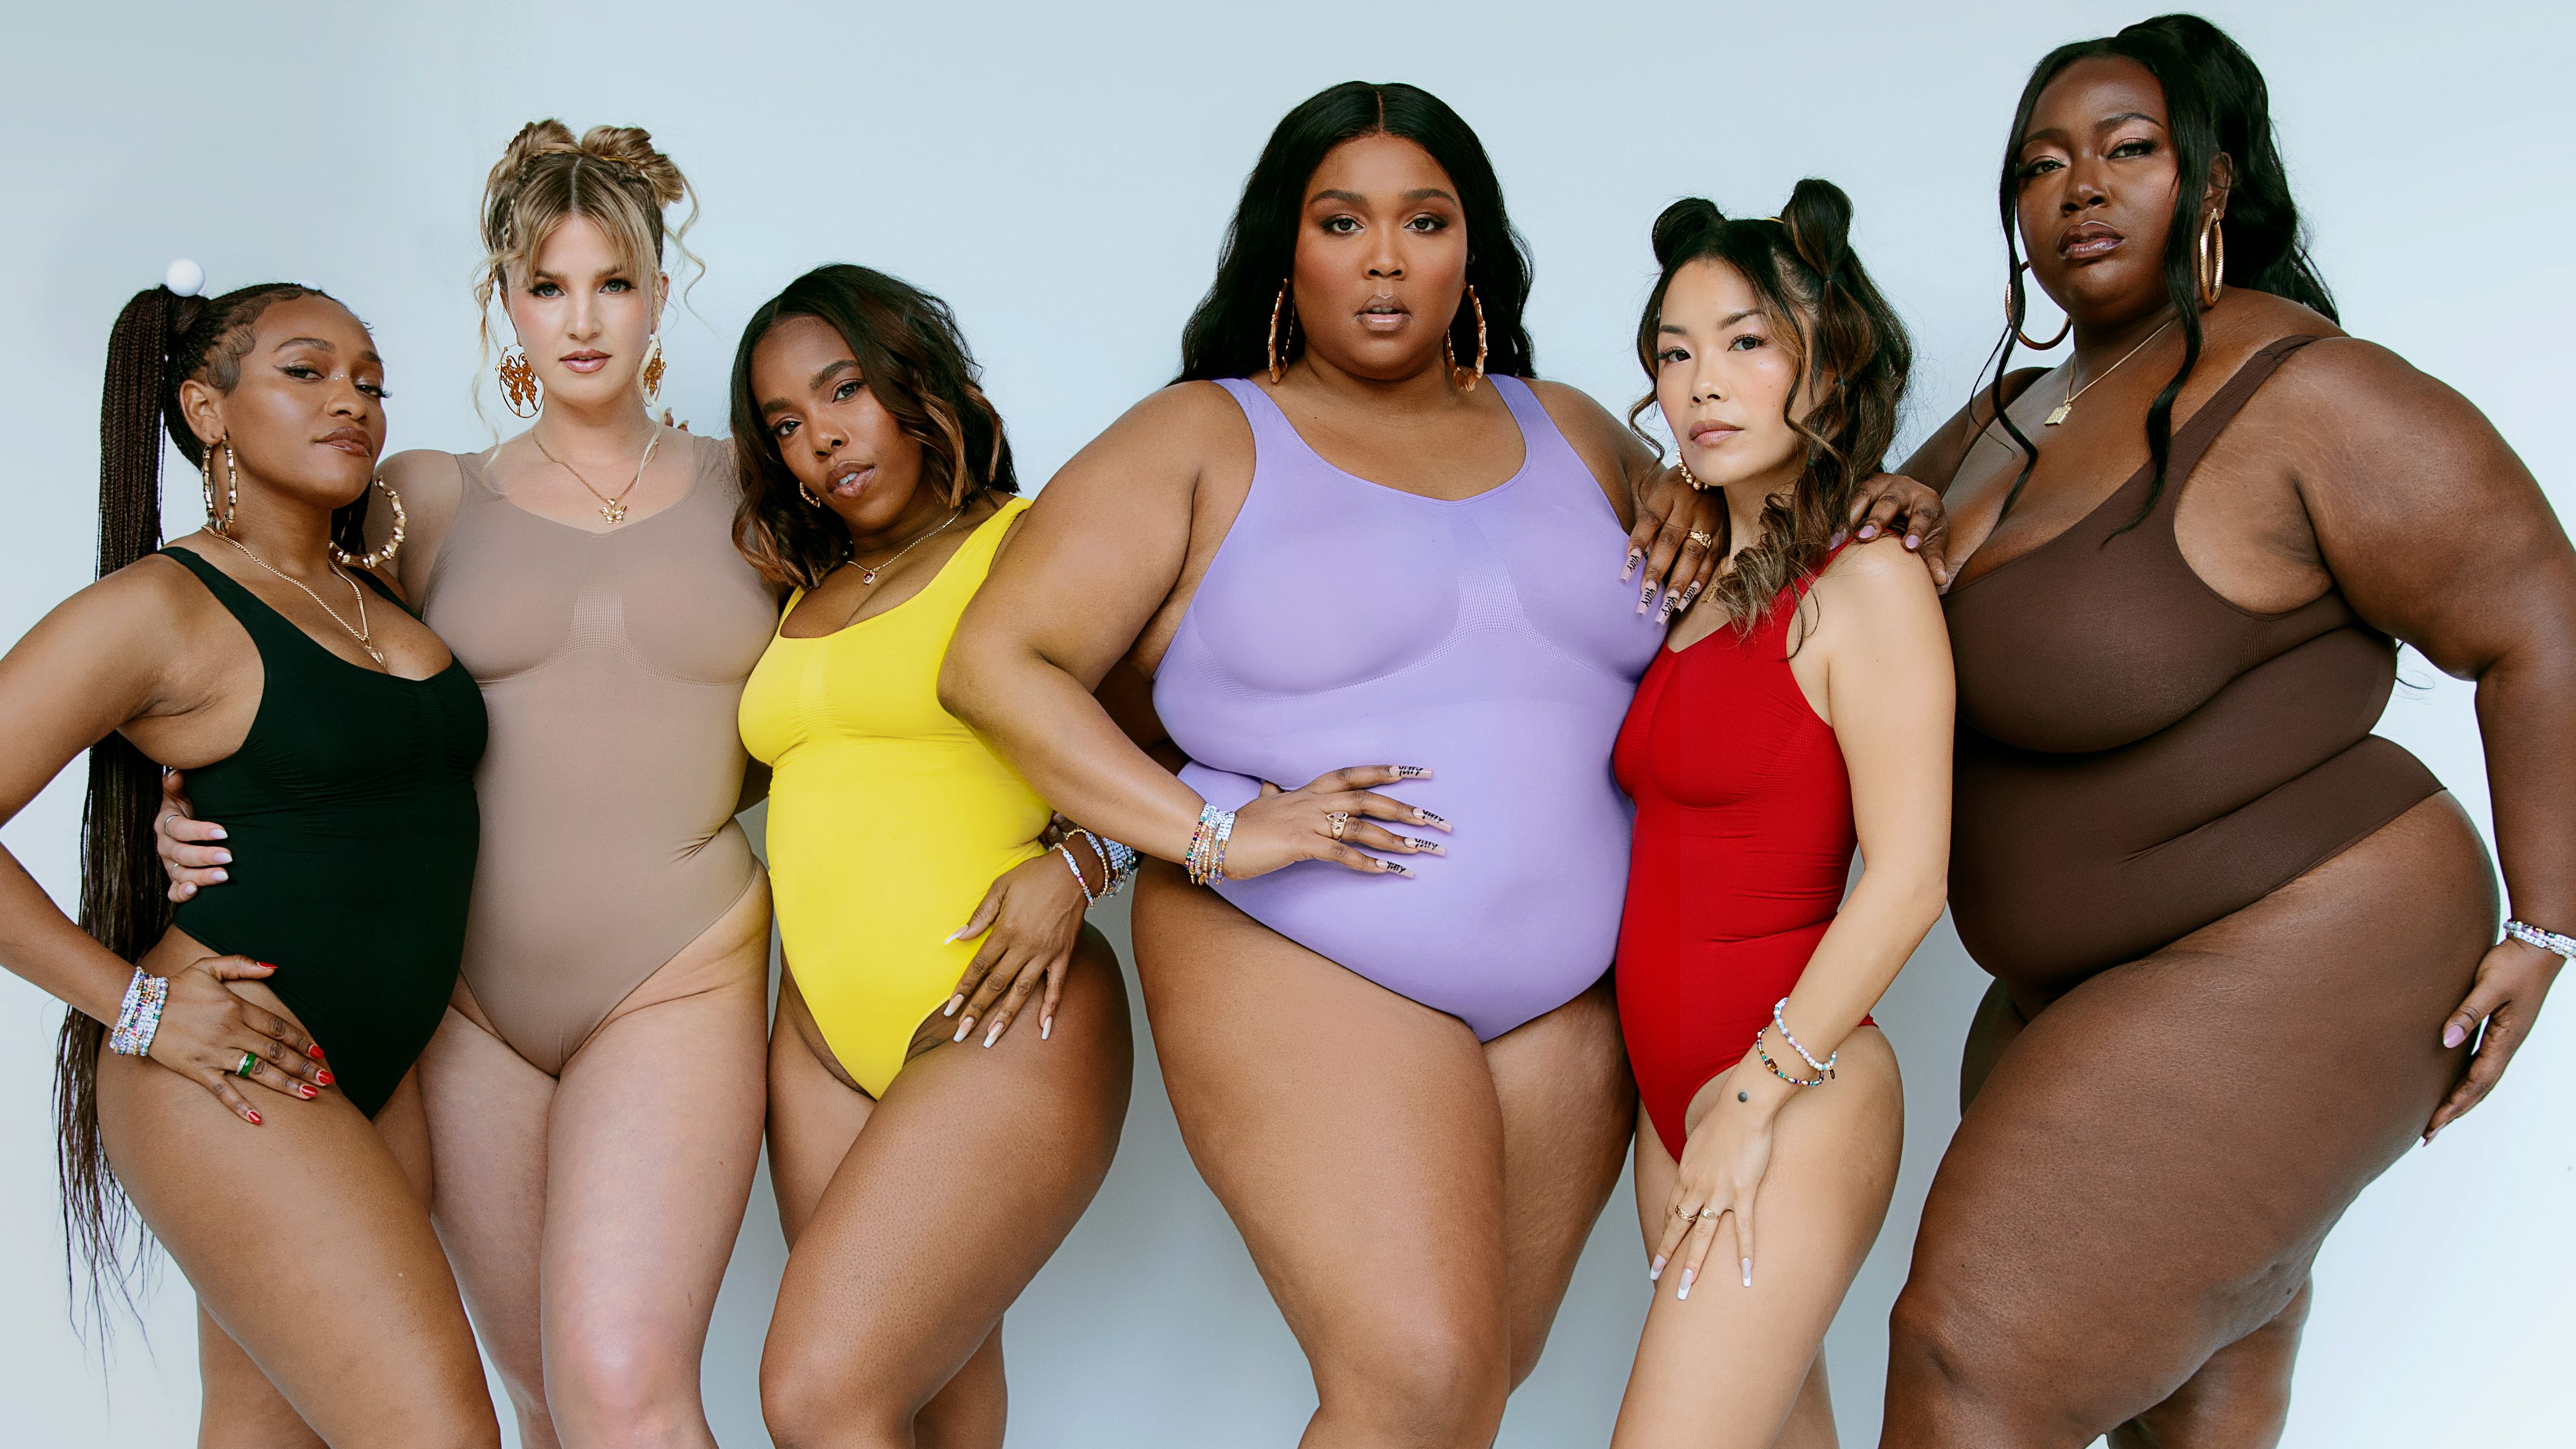 Yitty, the underwear brand founded by Lizzo, continues to expand